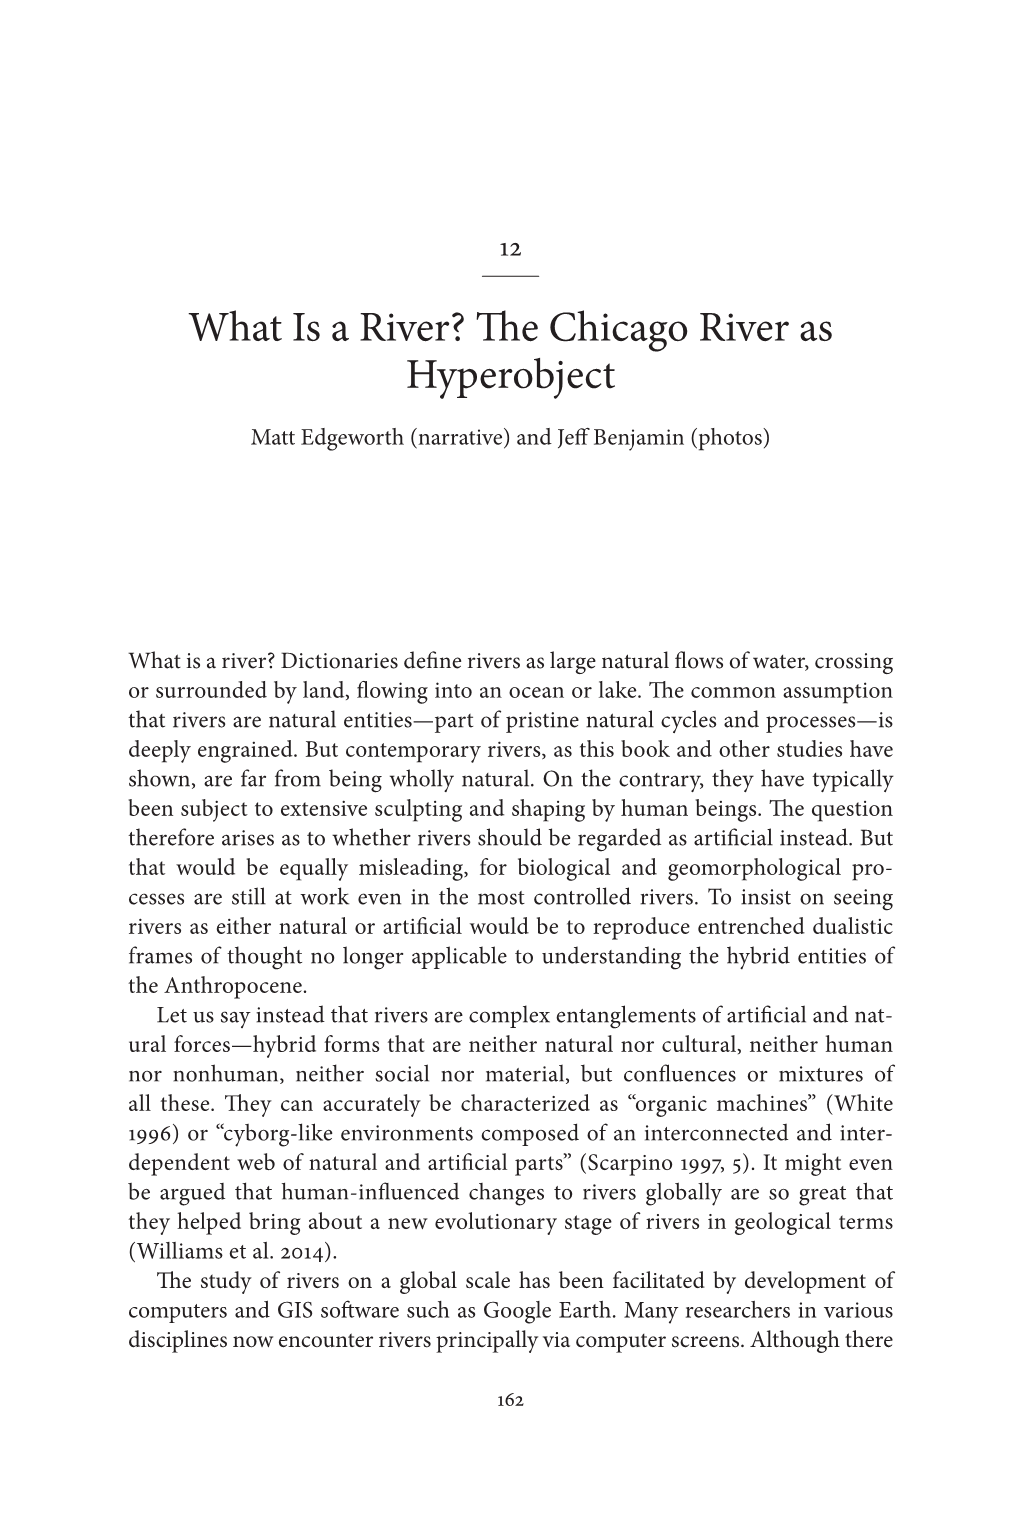 What Is a River? the Chicago River As Hyperobject